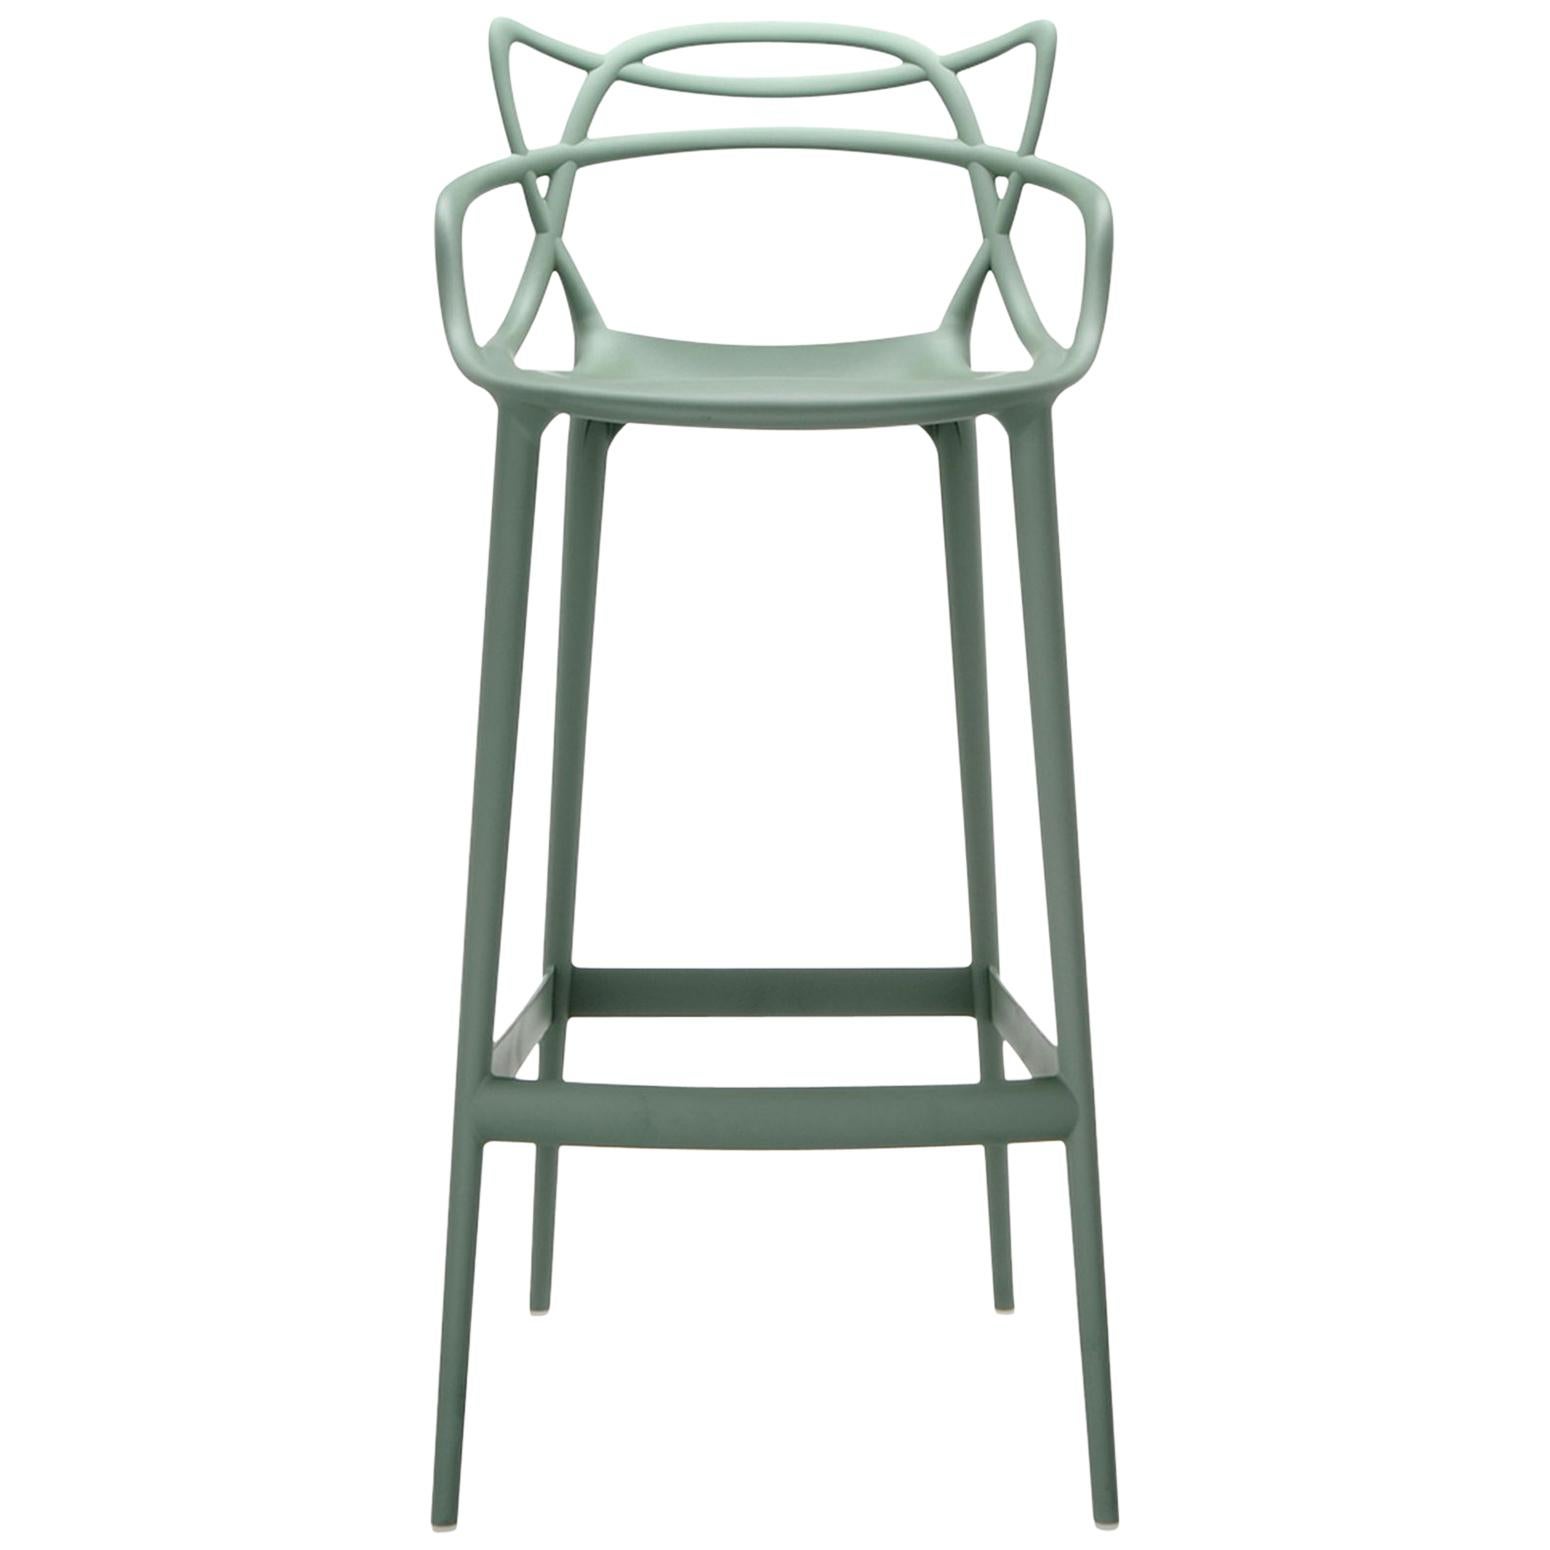 Kartell Masters Bar Stool in Sage Green by Philippe Starck & Eugeni Quitllet